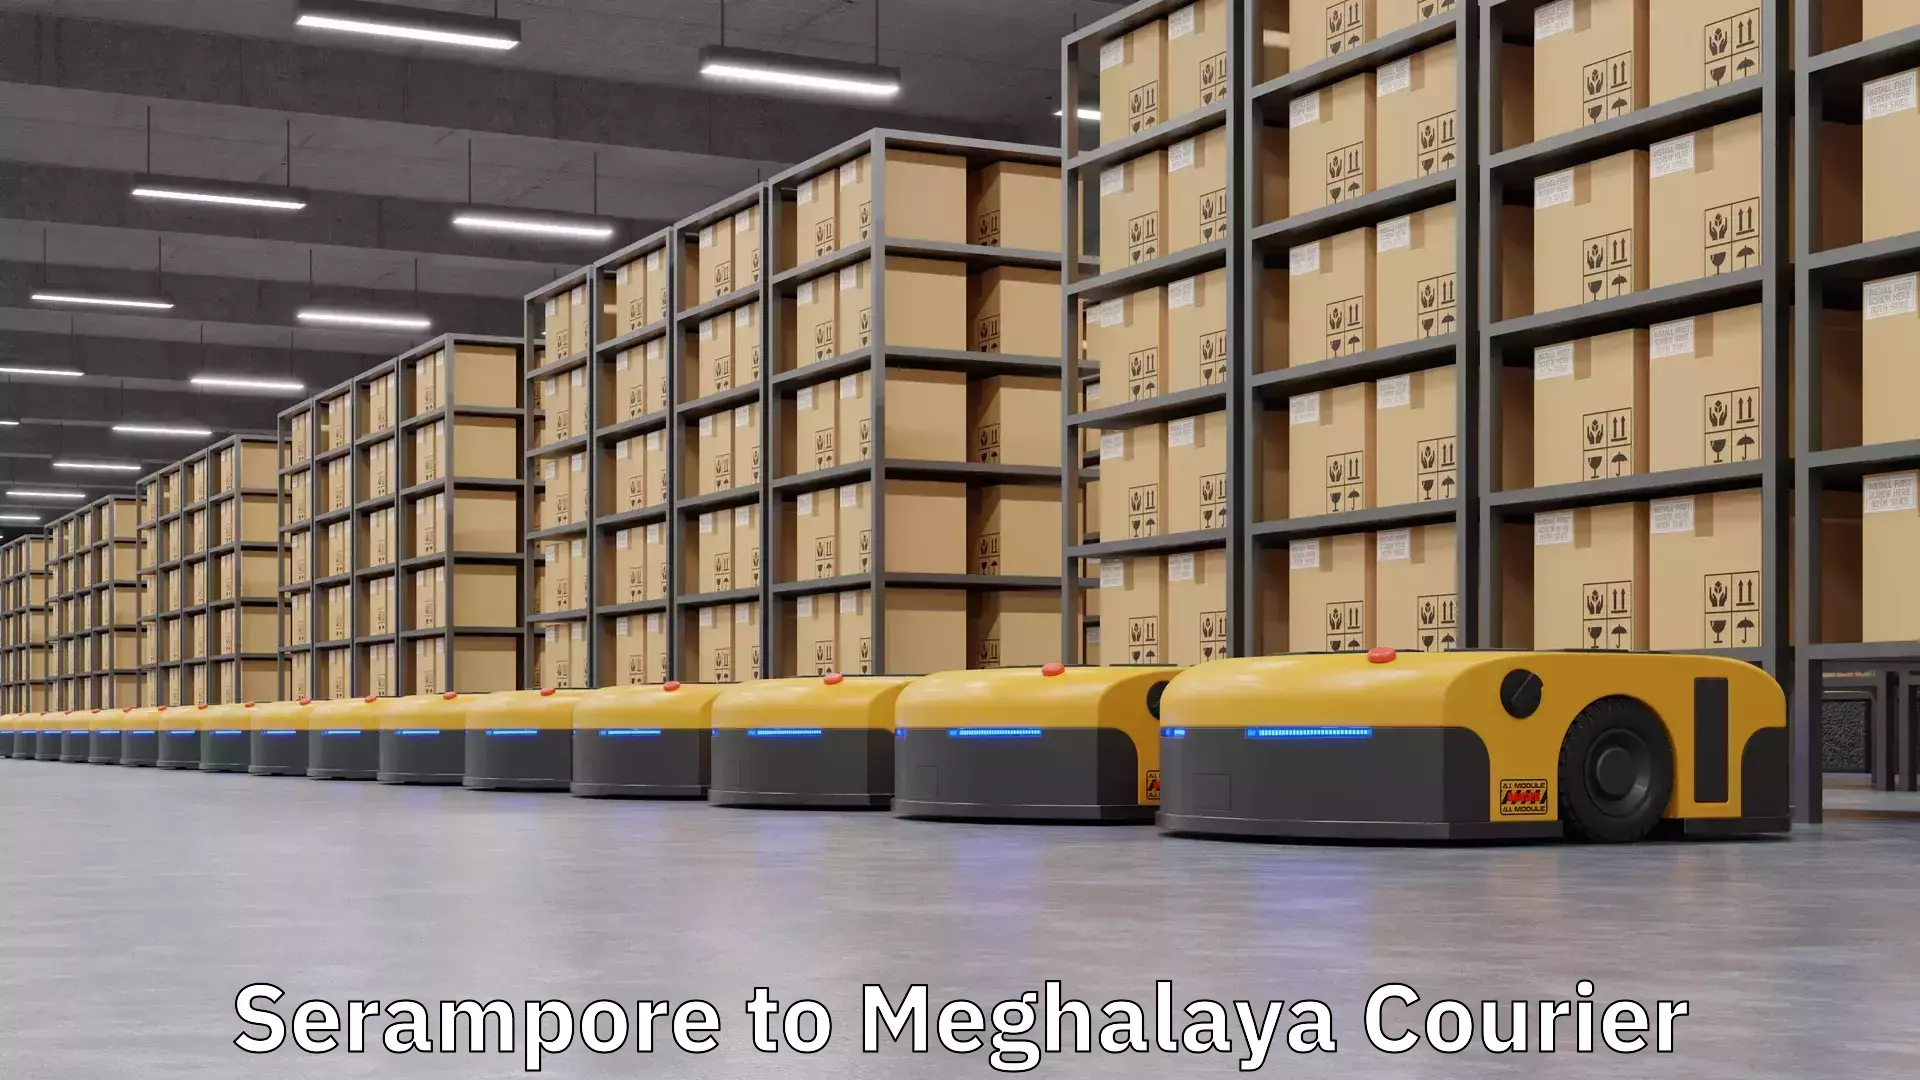 Reliable parcel services Serampore to Meghalaya